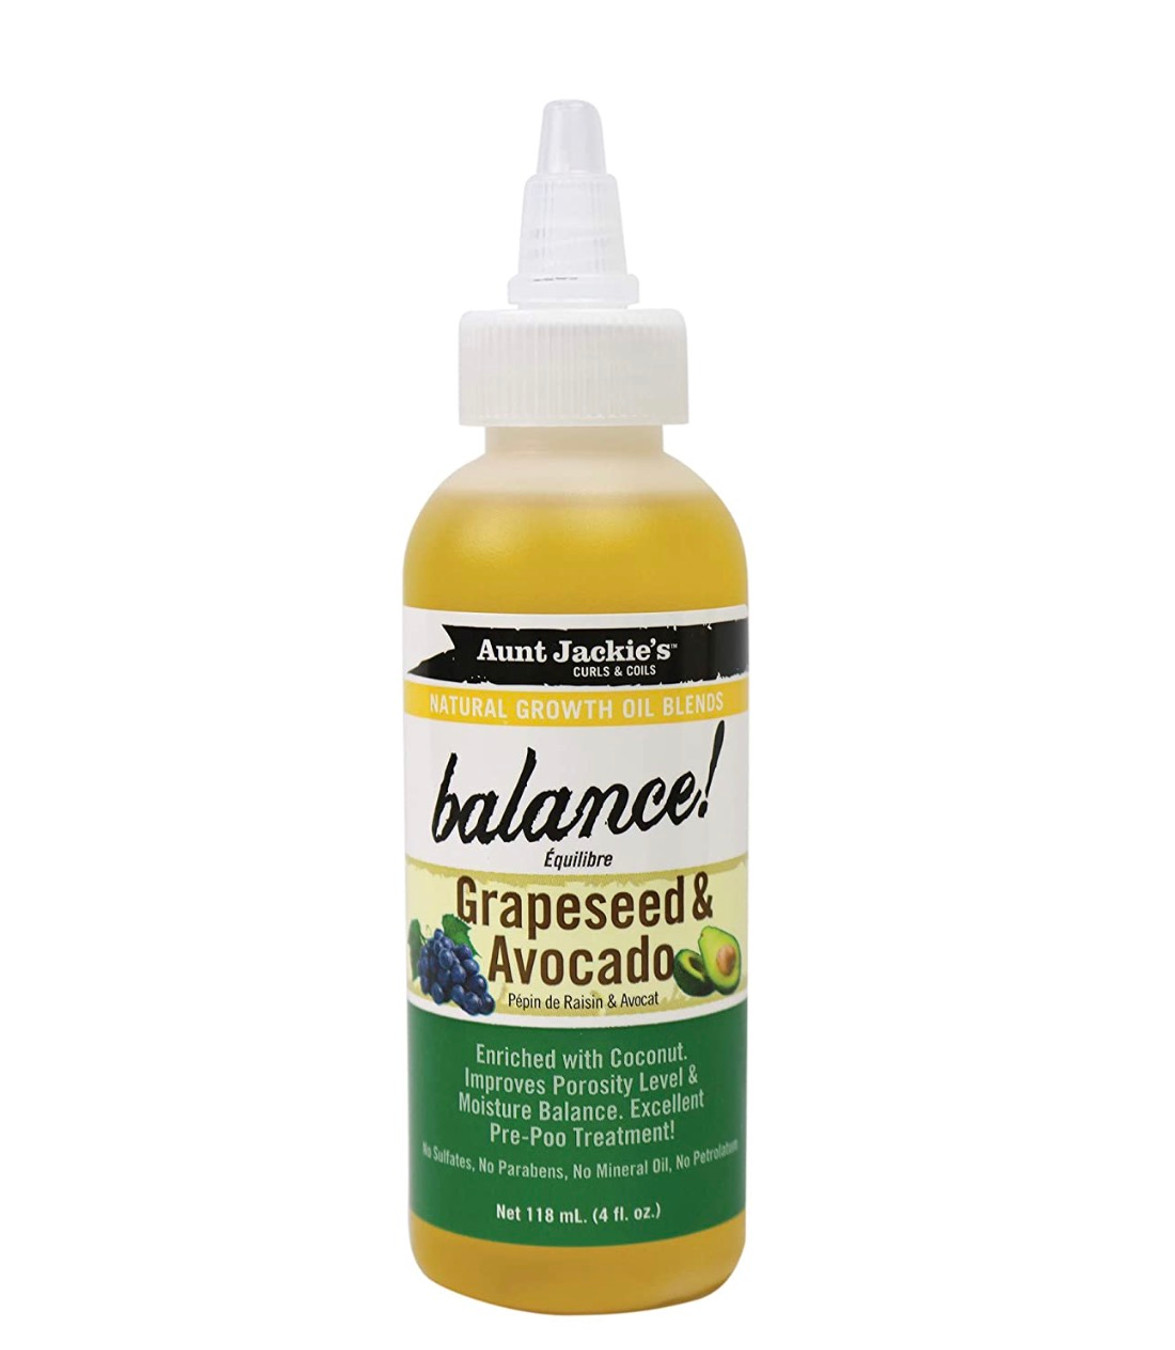 Aunt Jackie's Natural Growth Oil Blends Balance  Grapeseed and Avocado